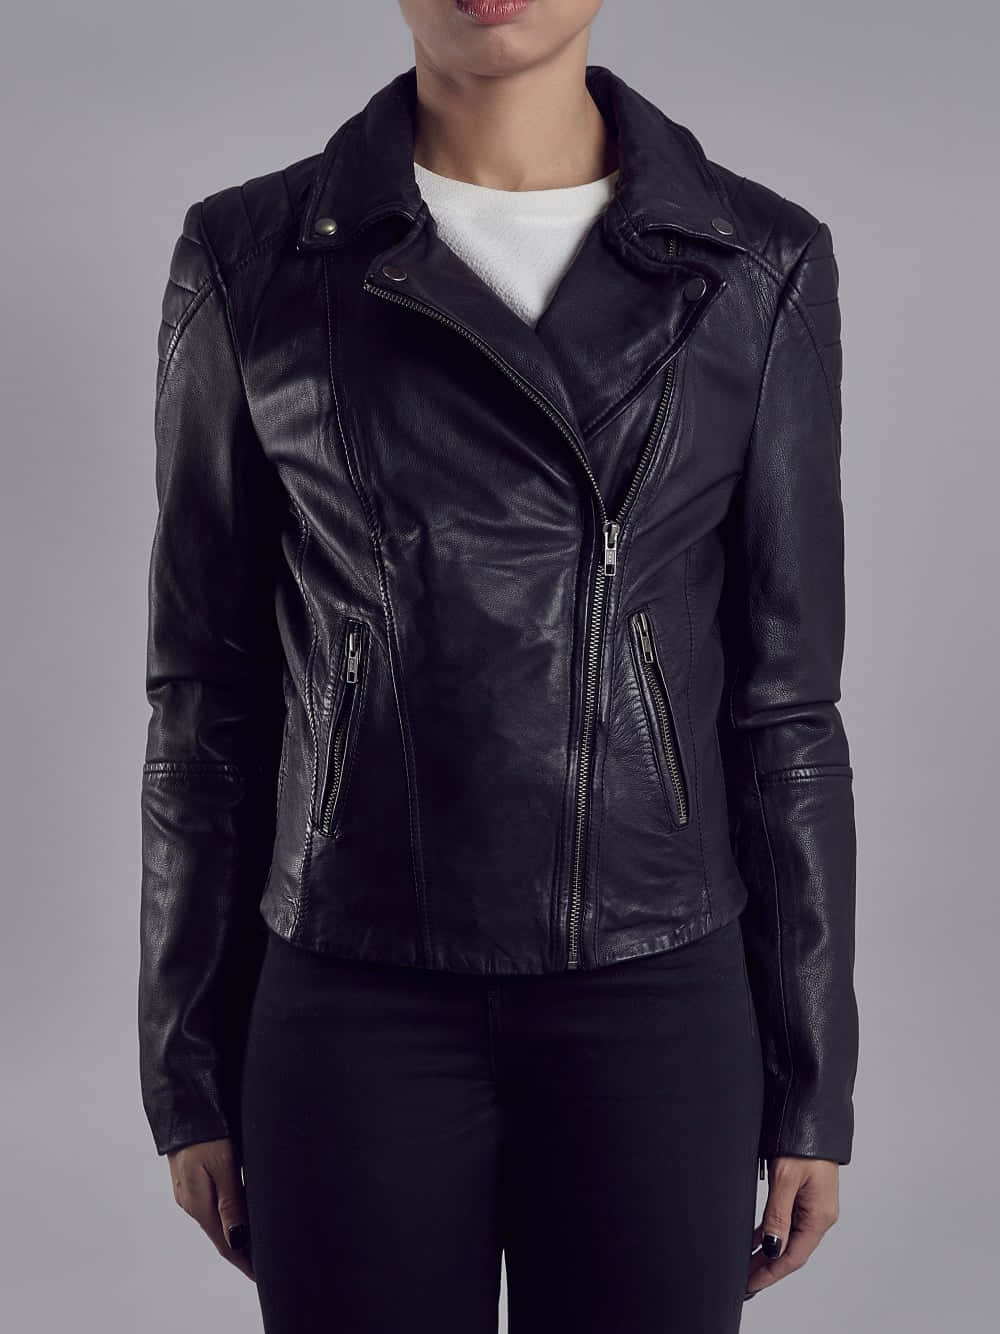 Download A Woman Wearing A Black Leather Jacket | Wallpapers.com